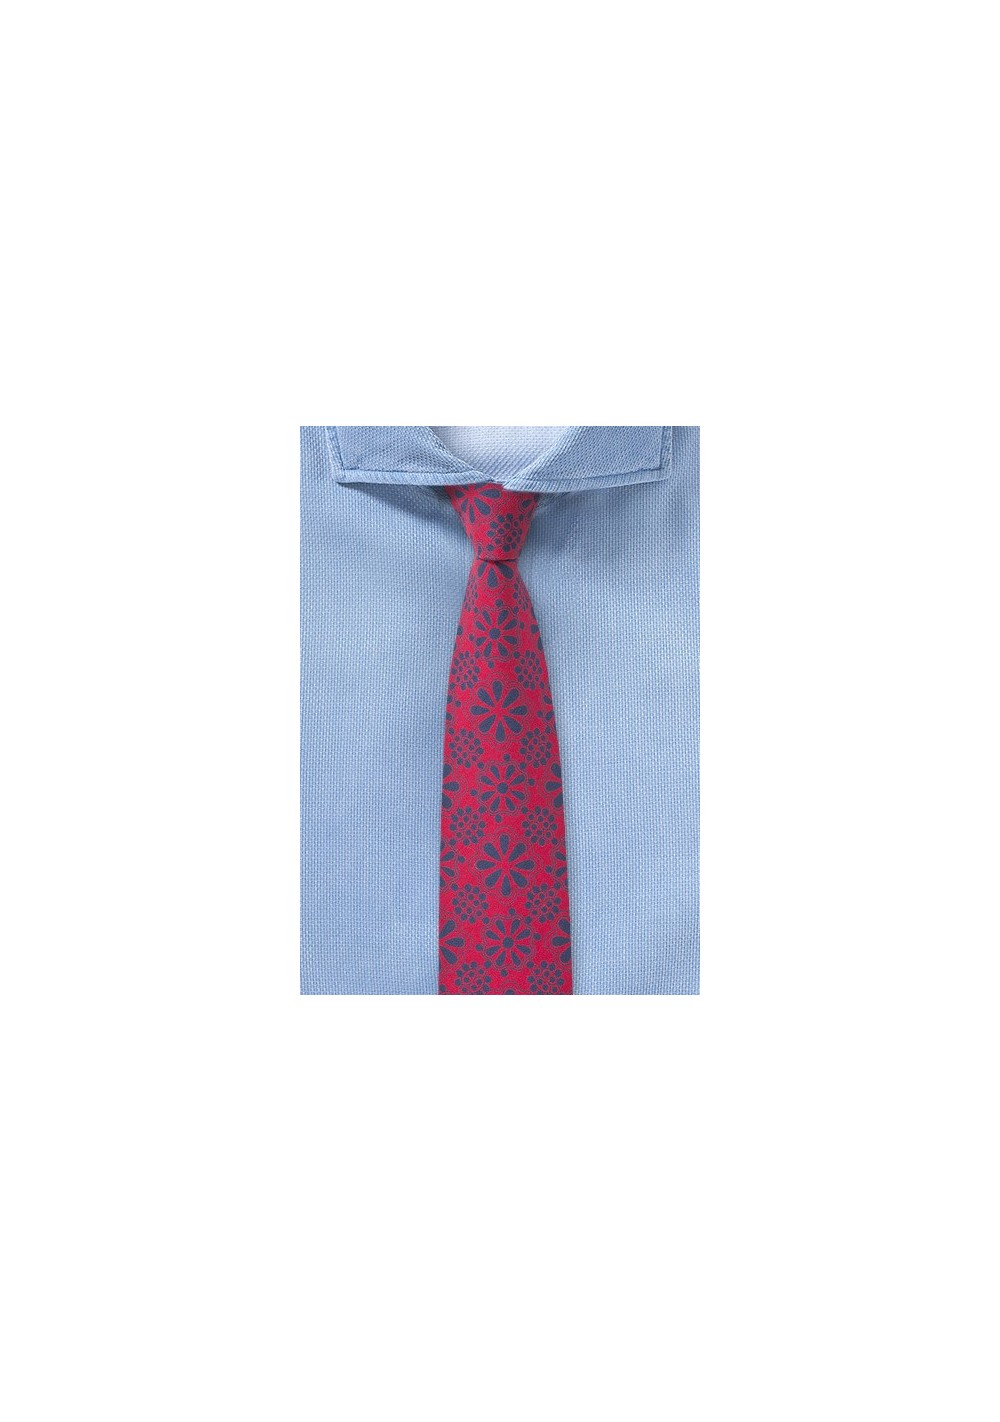 Red Tie with Geometric Lace Print in Navy